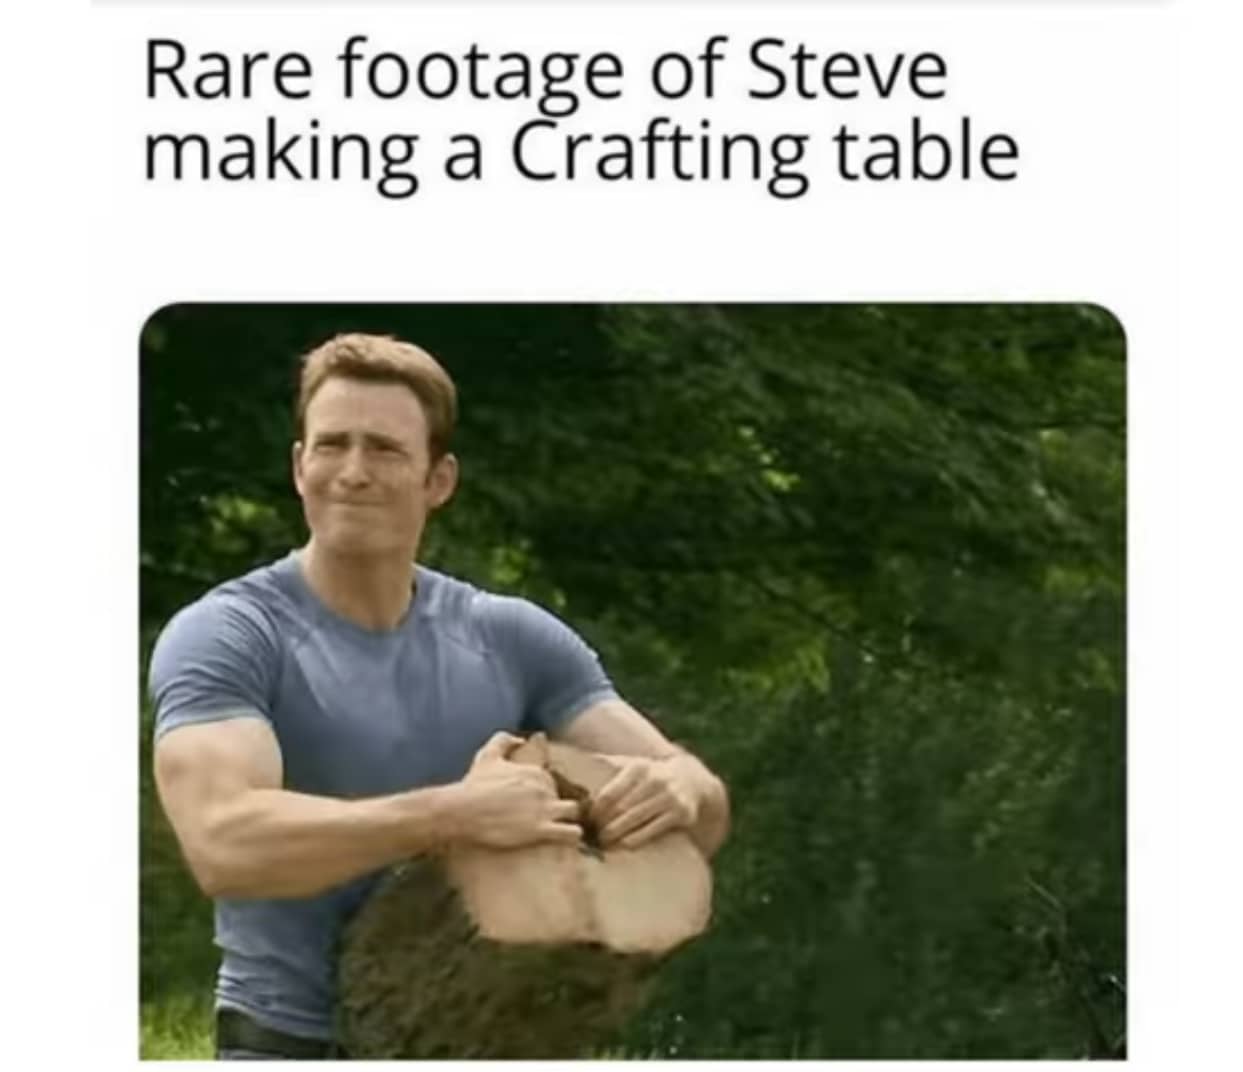 Minecraft, RepostSleuthBot, Visit, Negative, Feedback, False Negative minecraft memes Minecraft, RepostSleuthBot, Visit, Negative, Feedback, False Negative text: Rare footage of Steve making a Crafting table 